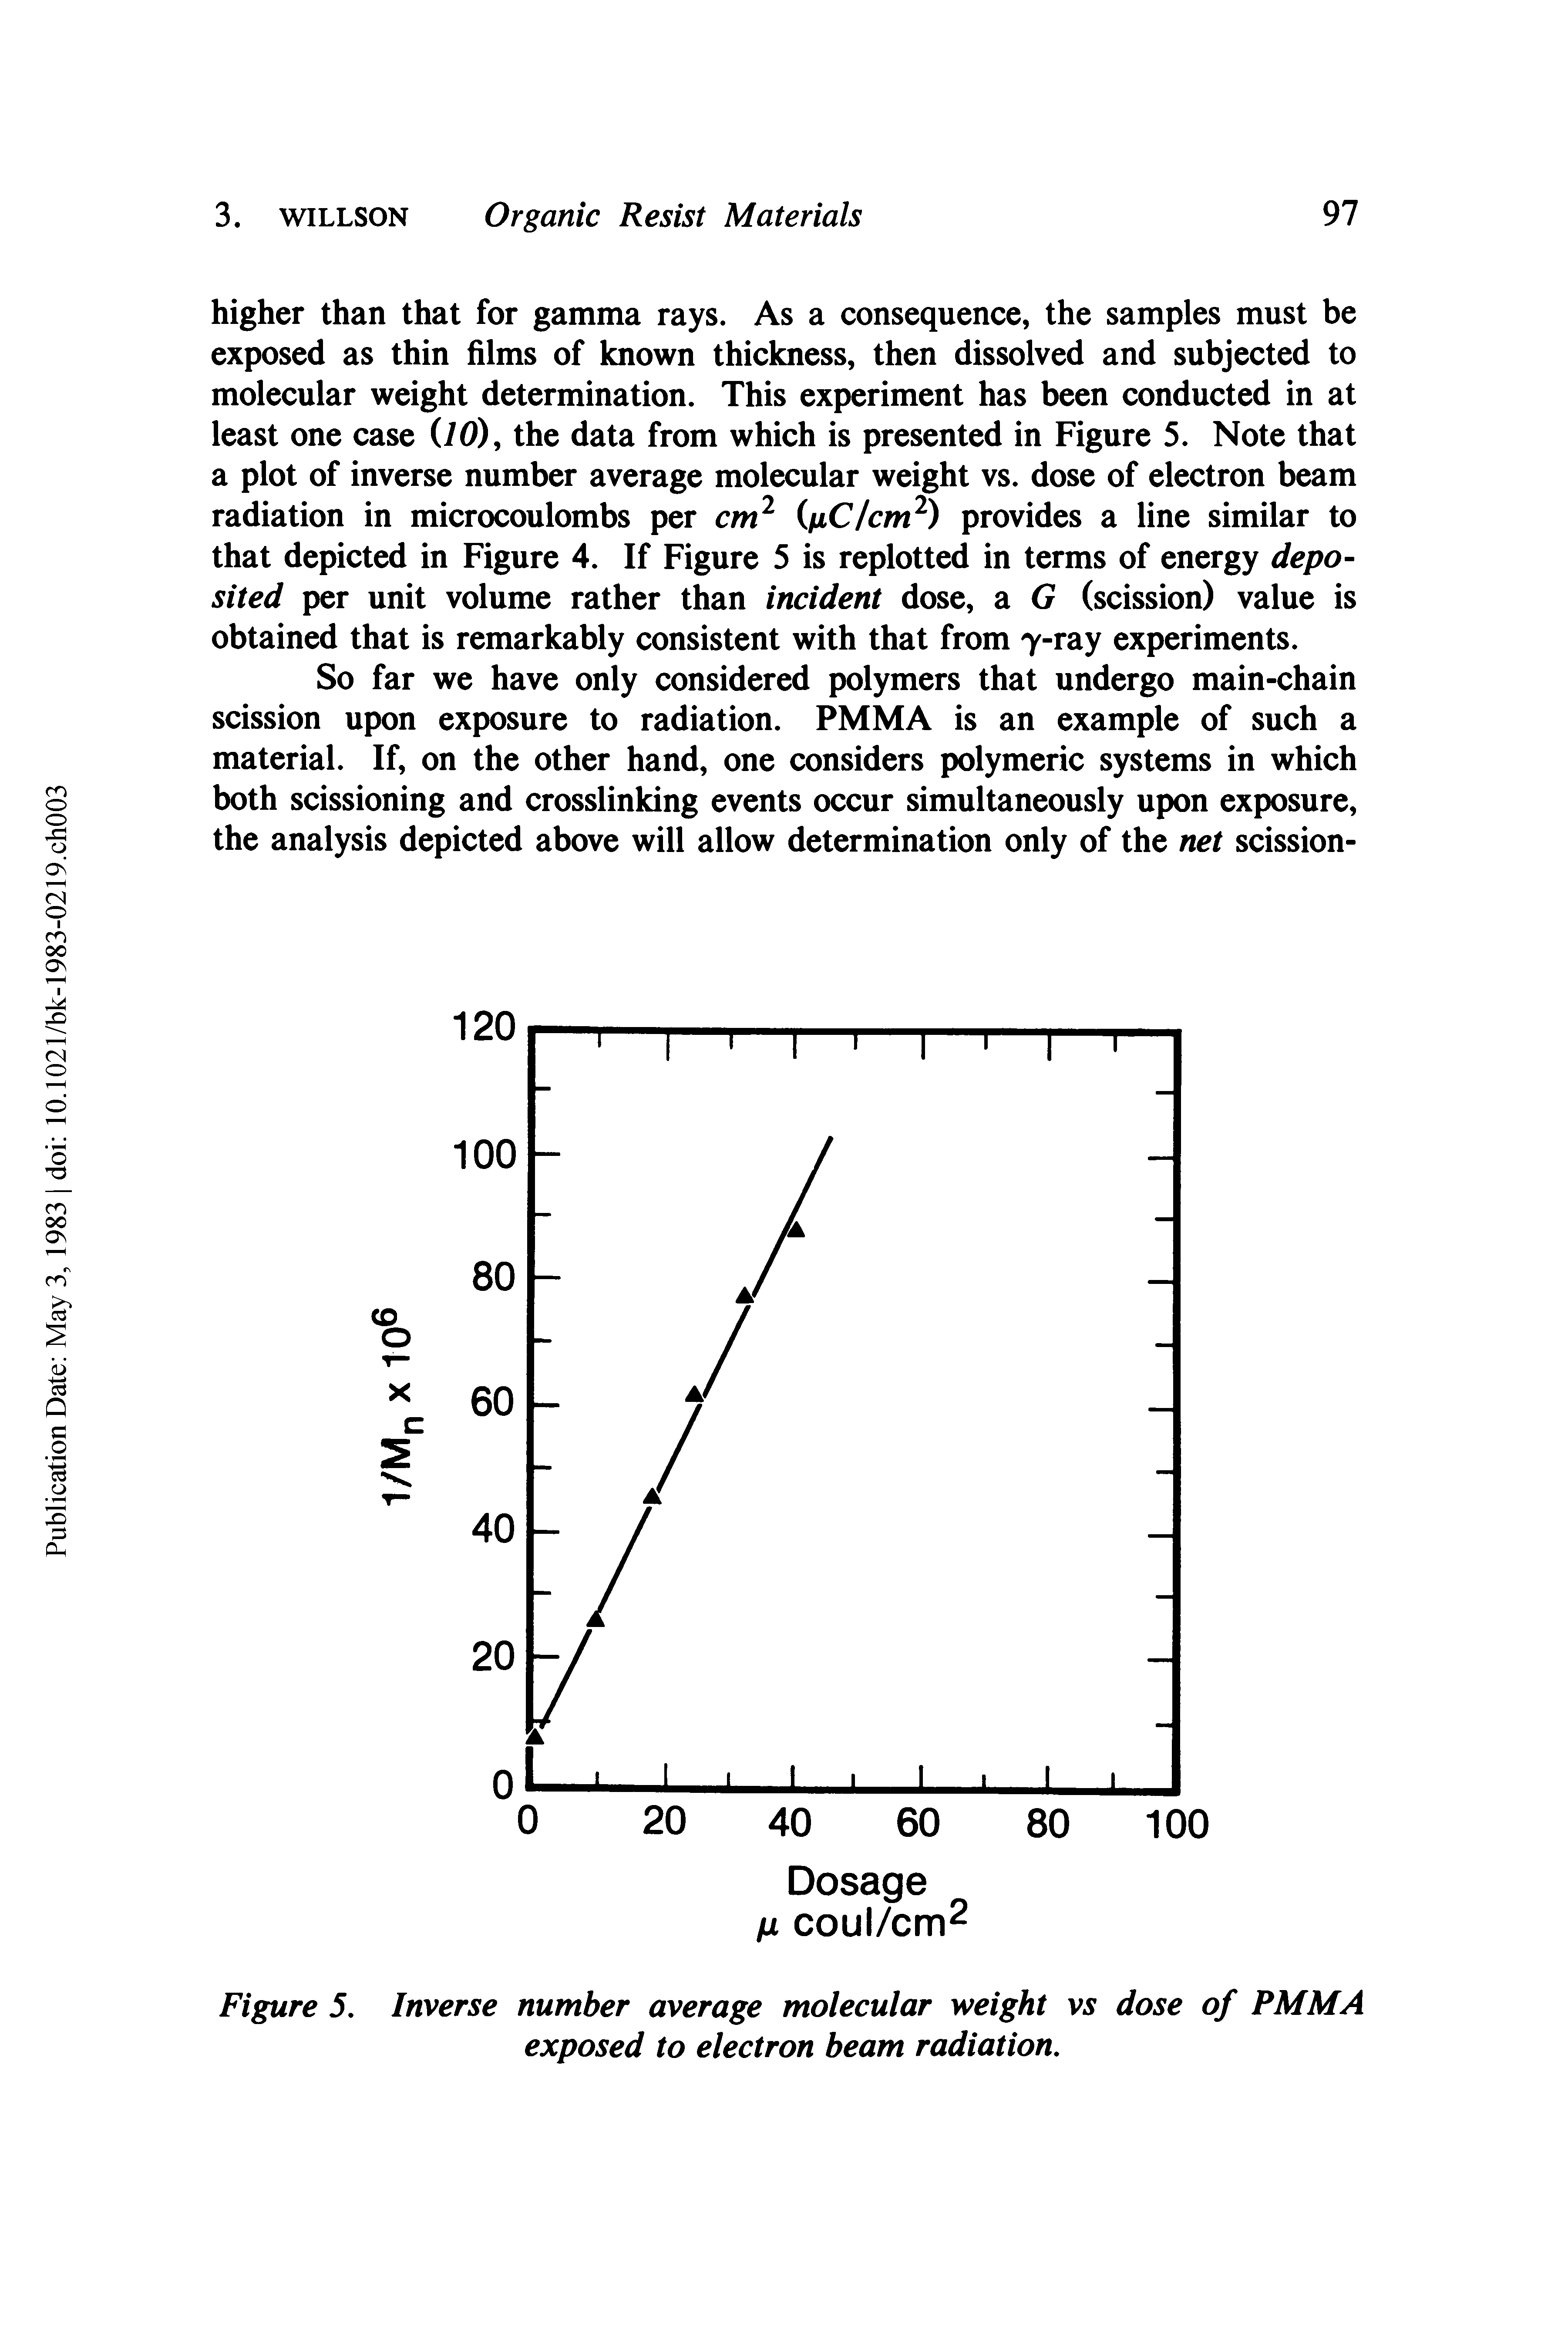 Figure 5. Inverse number average molecular weight vs dose of PMMA exposed to electron beam radiation.